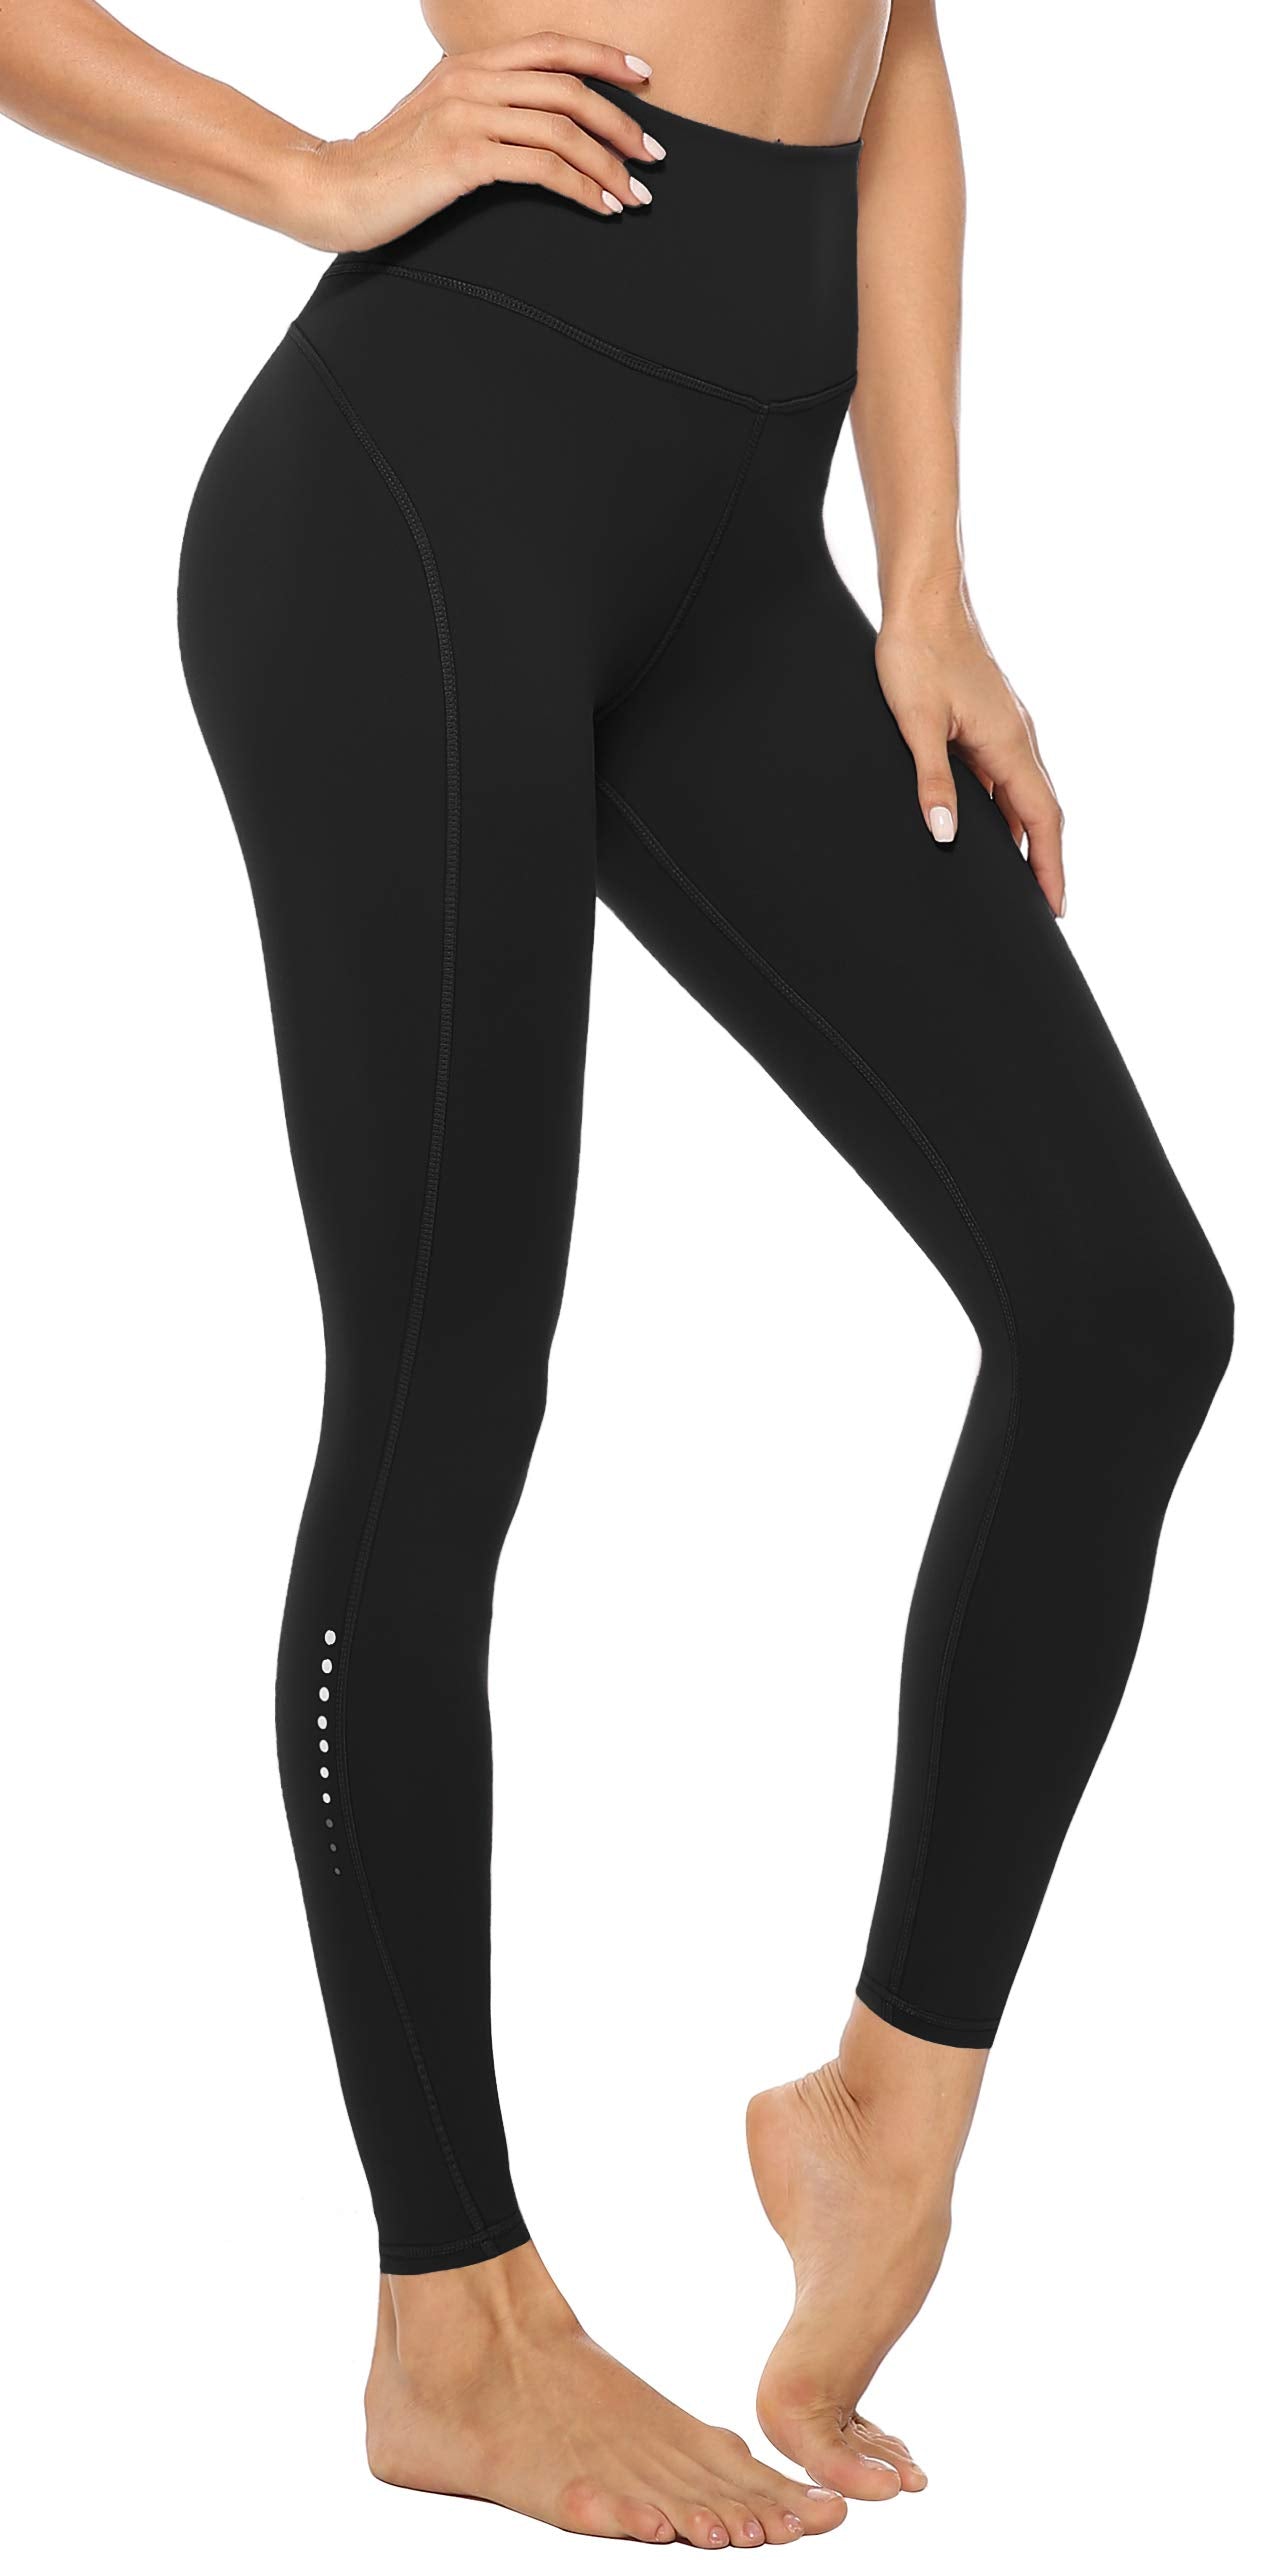 OUGES Womens High Waist Yoga Pants with Pockets Workout Running Leggings